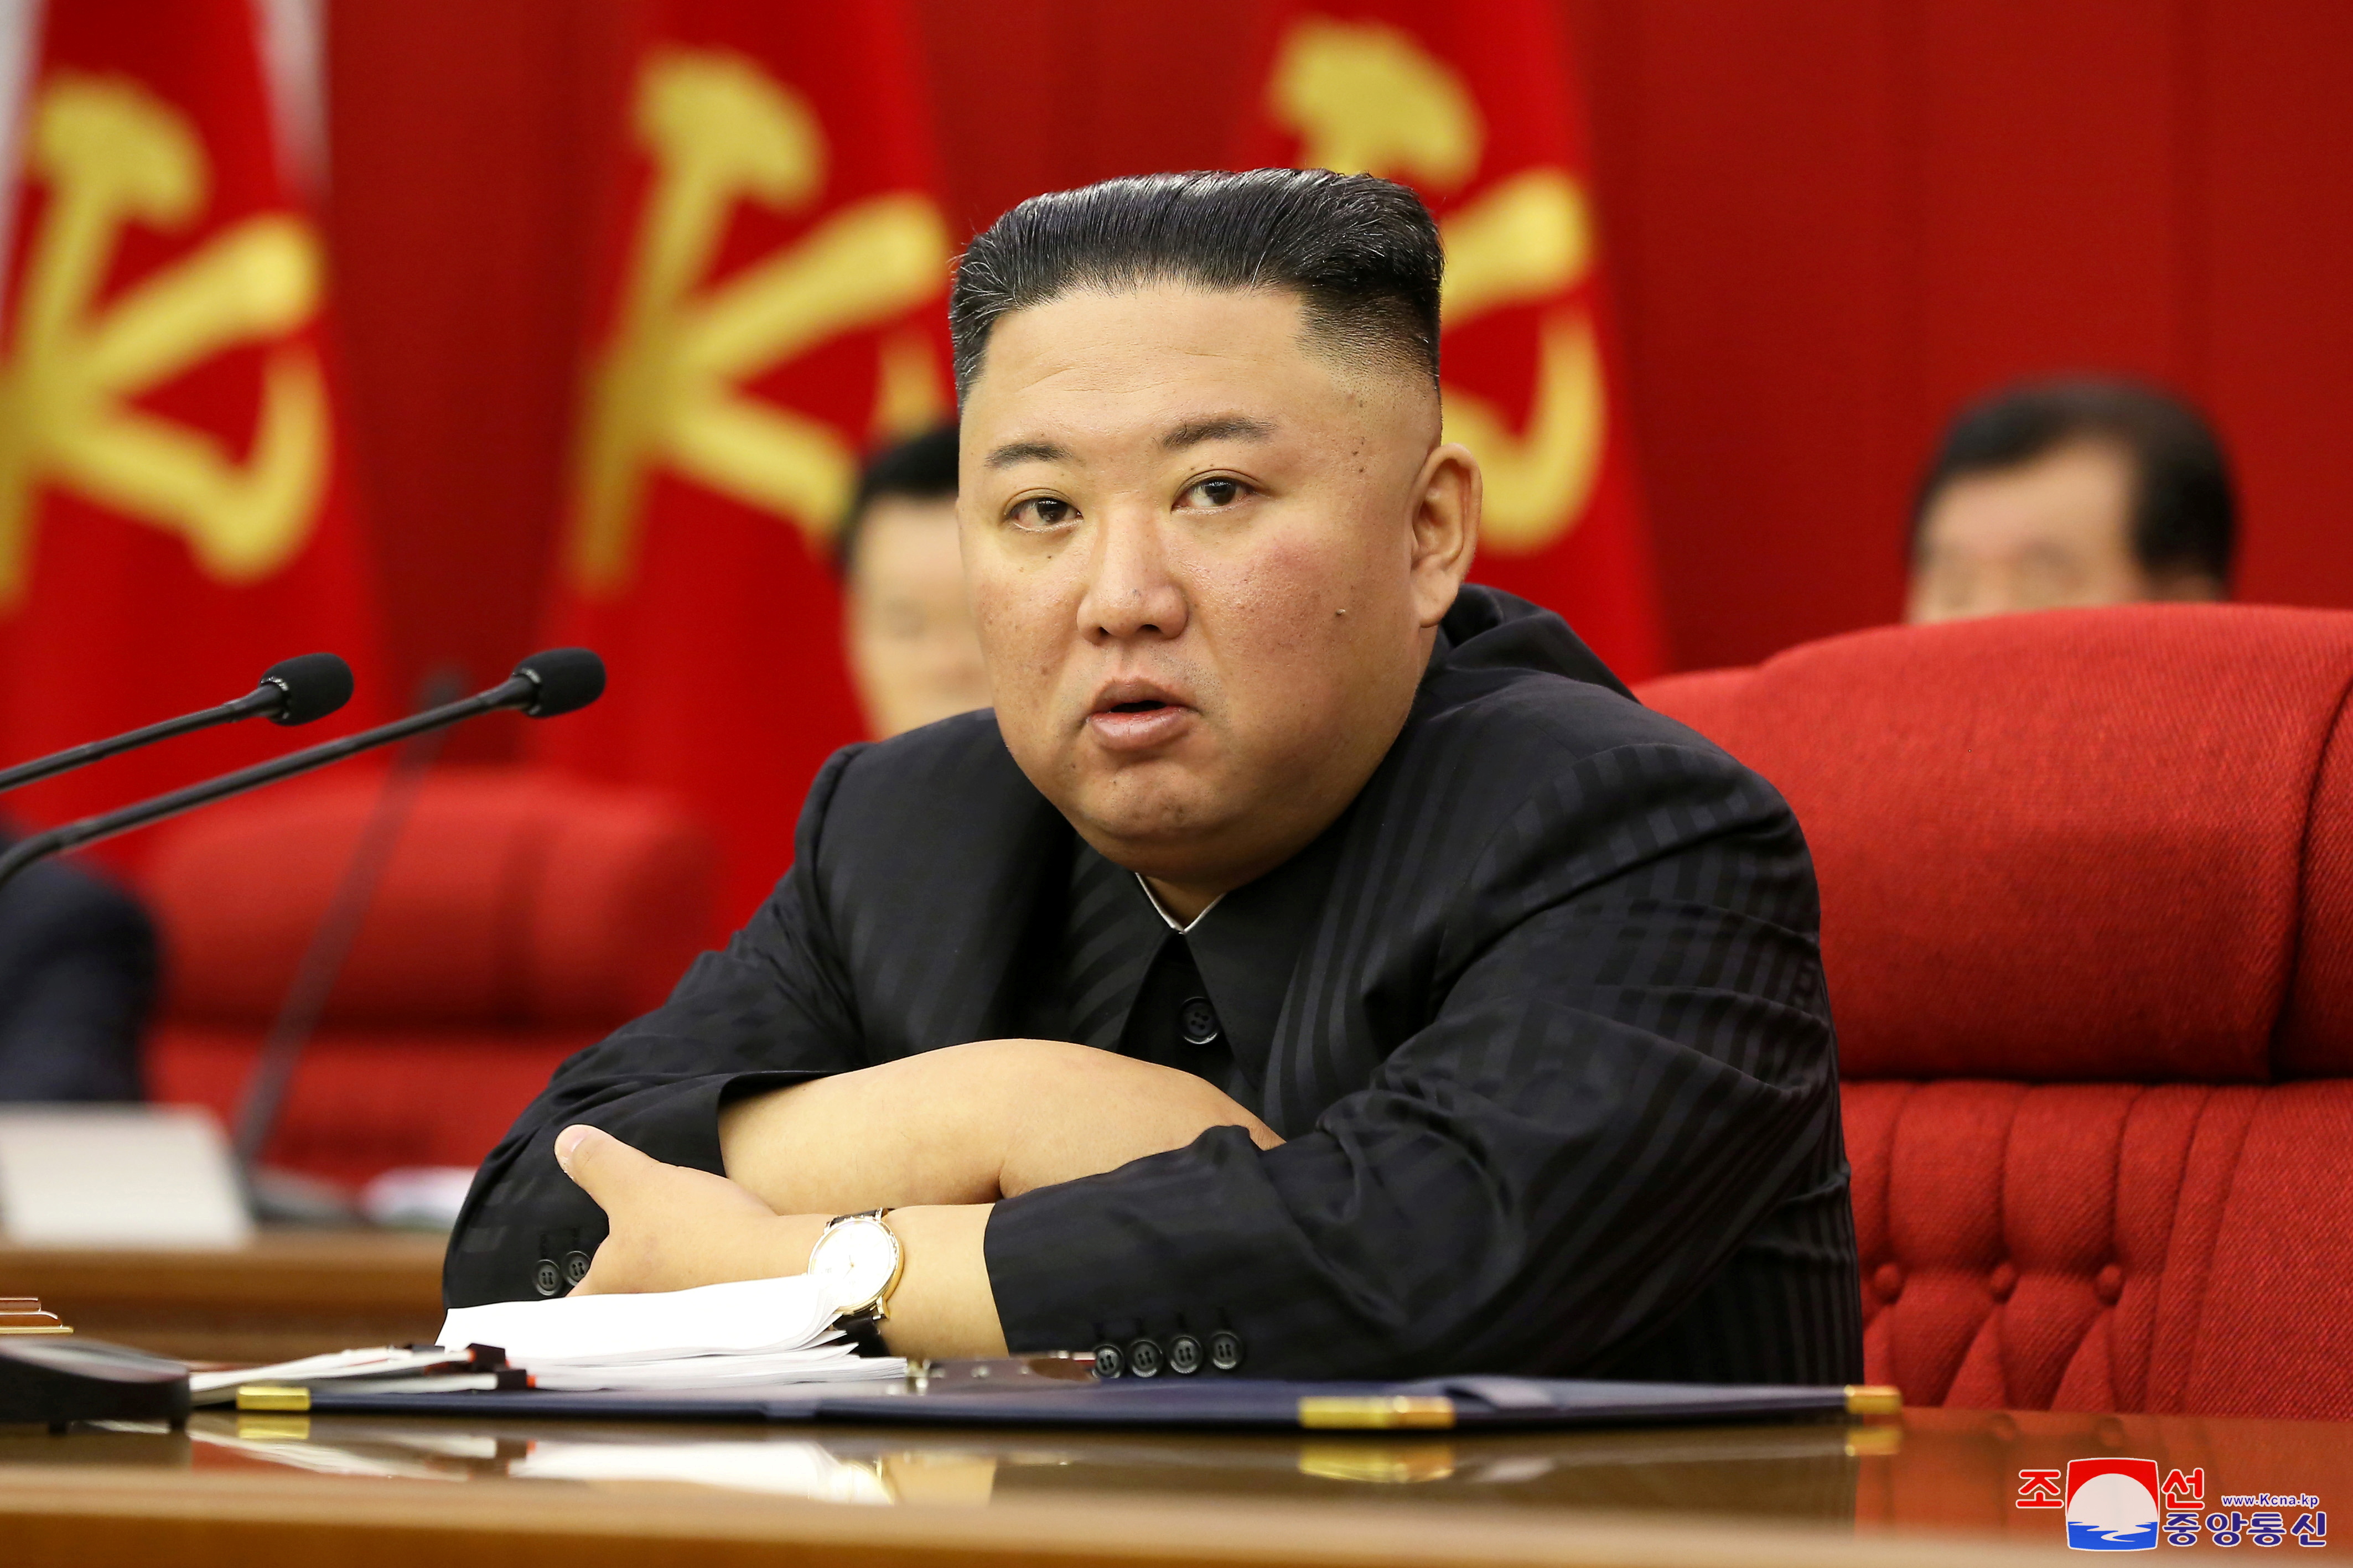 Kim jong un. RBVY XBY by.